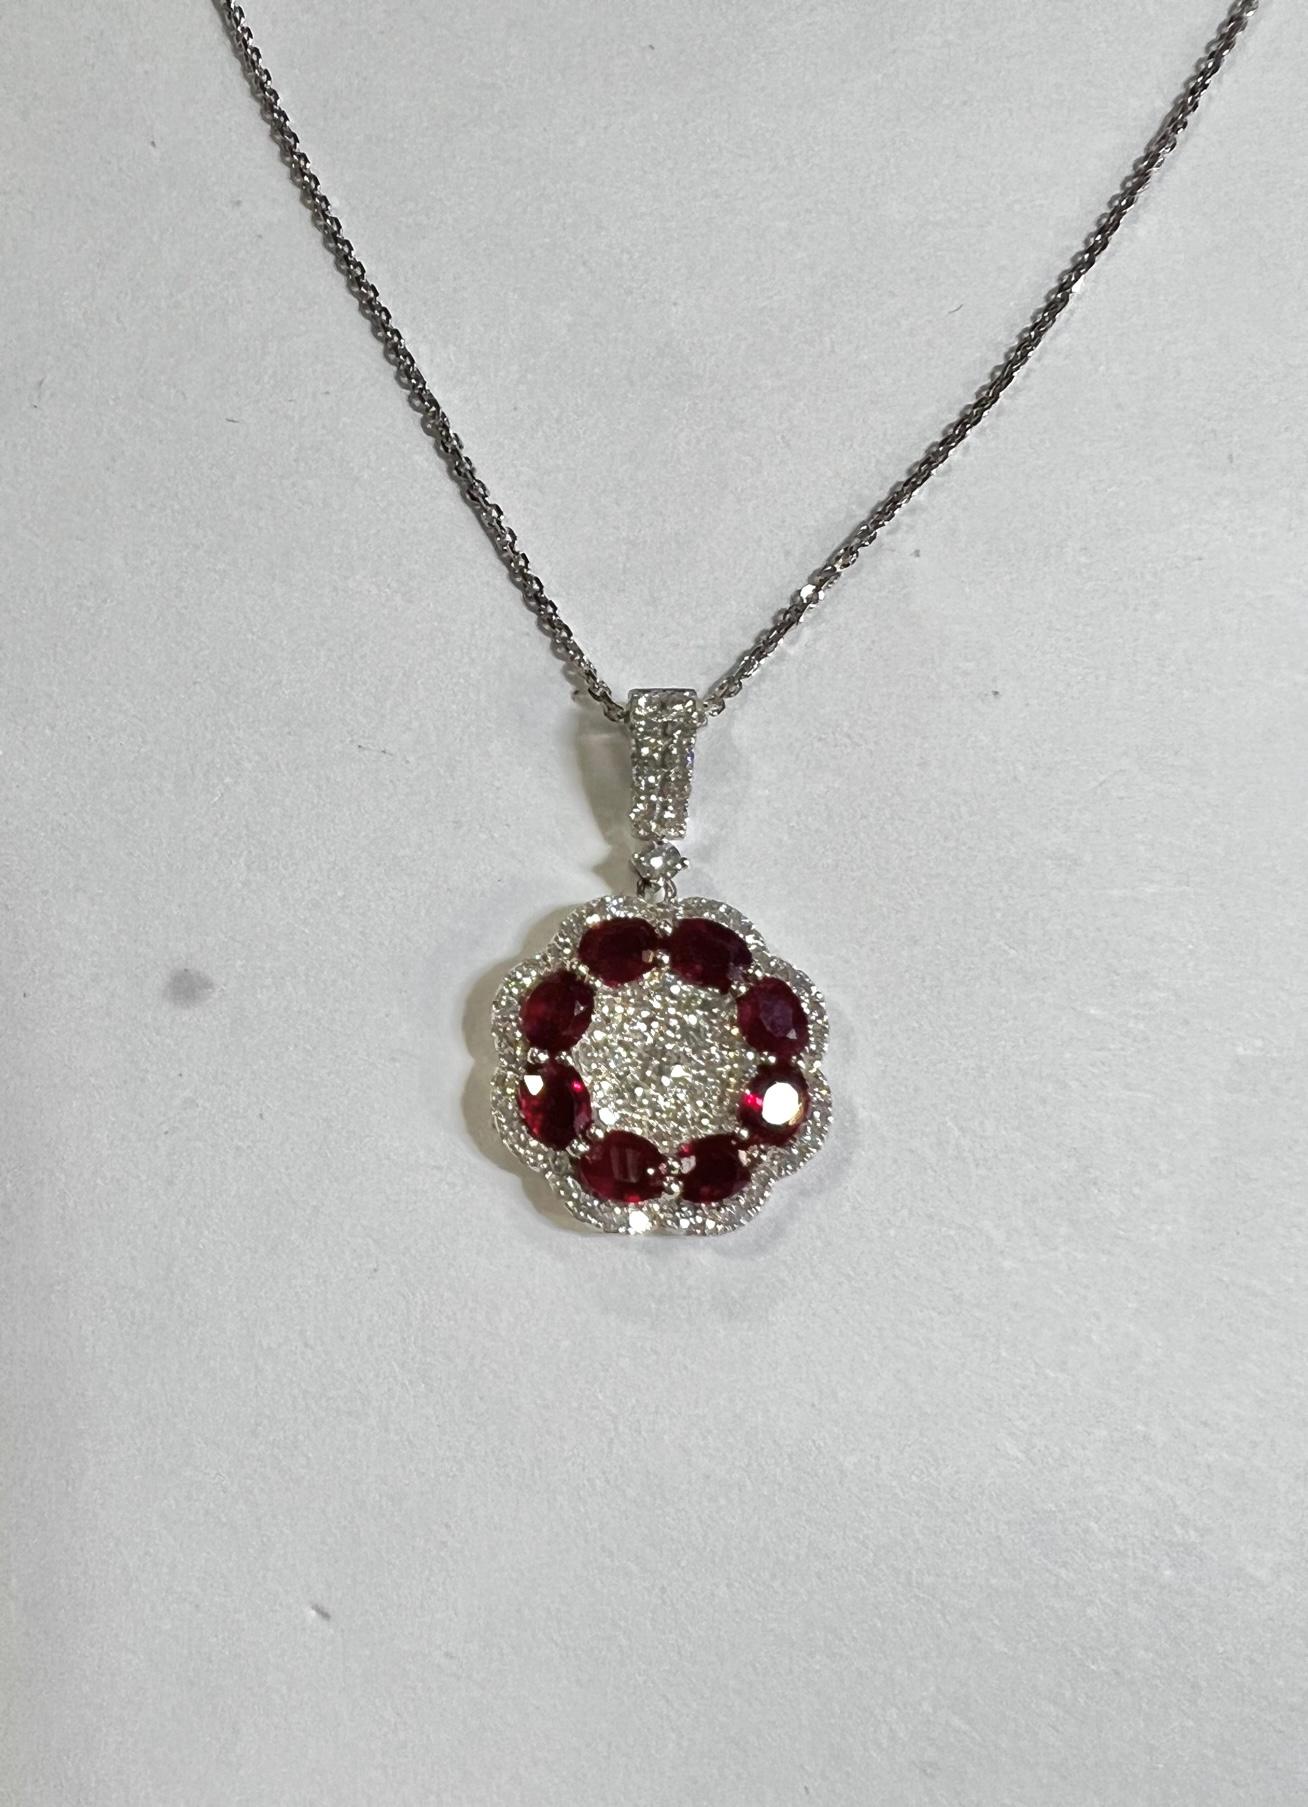 Ruby and Diamond Wreath Pendant 

Stones: Ruby  
Stone Shape: Oval 
Stone Carat: 1.50 Carat 
Side Stones: 76 Diamonds 
Stone Shape: Round Diamonds
Stone Weight: 0.67 Carat 
Material: 18K Yellow Gold 
Chain: Diamond Cut Link Chain with Lobster Clasp